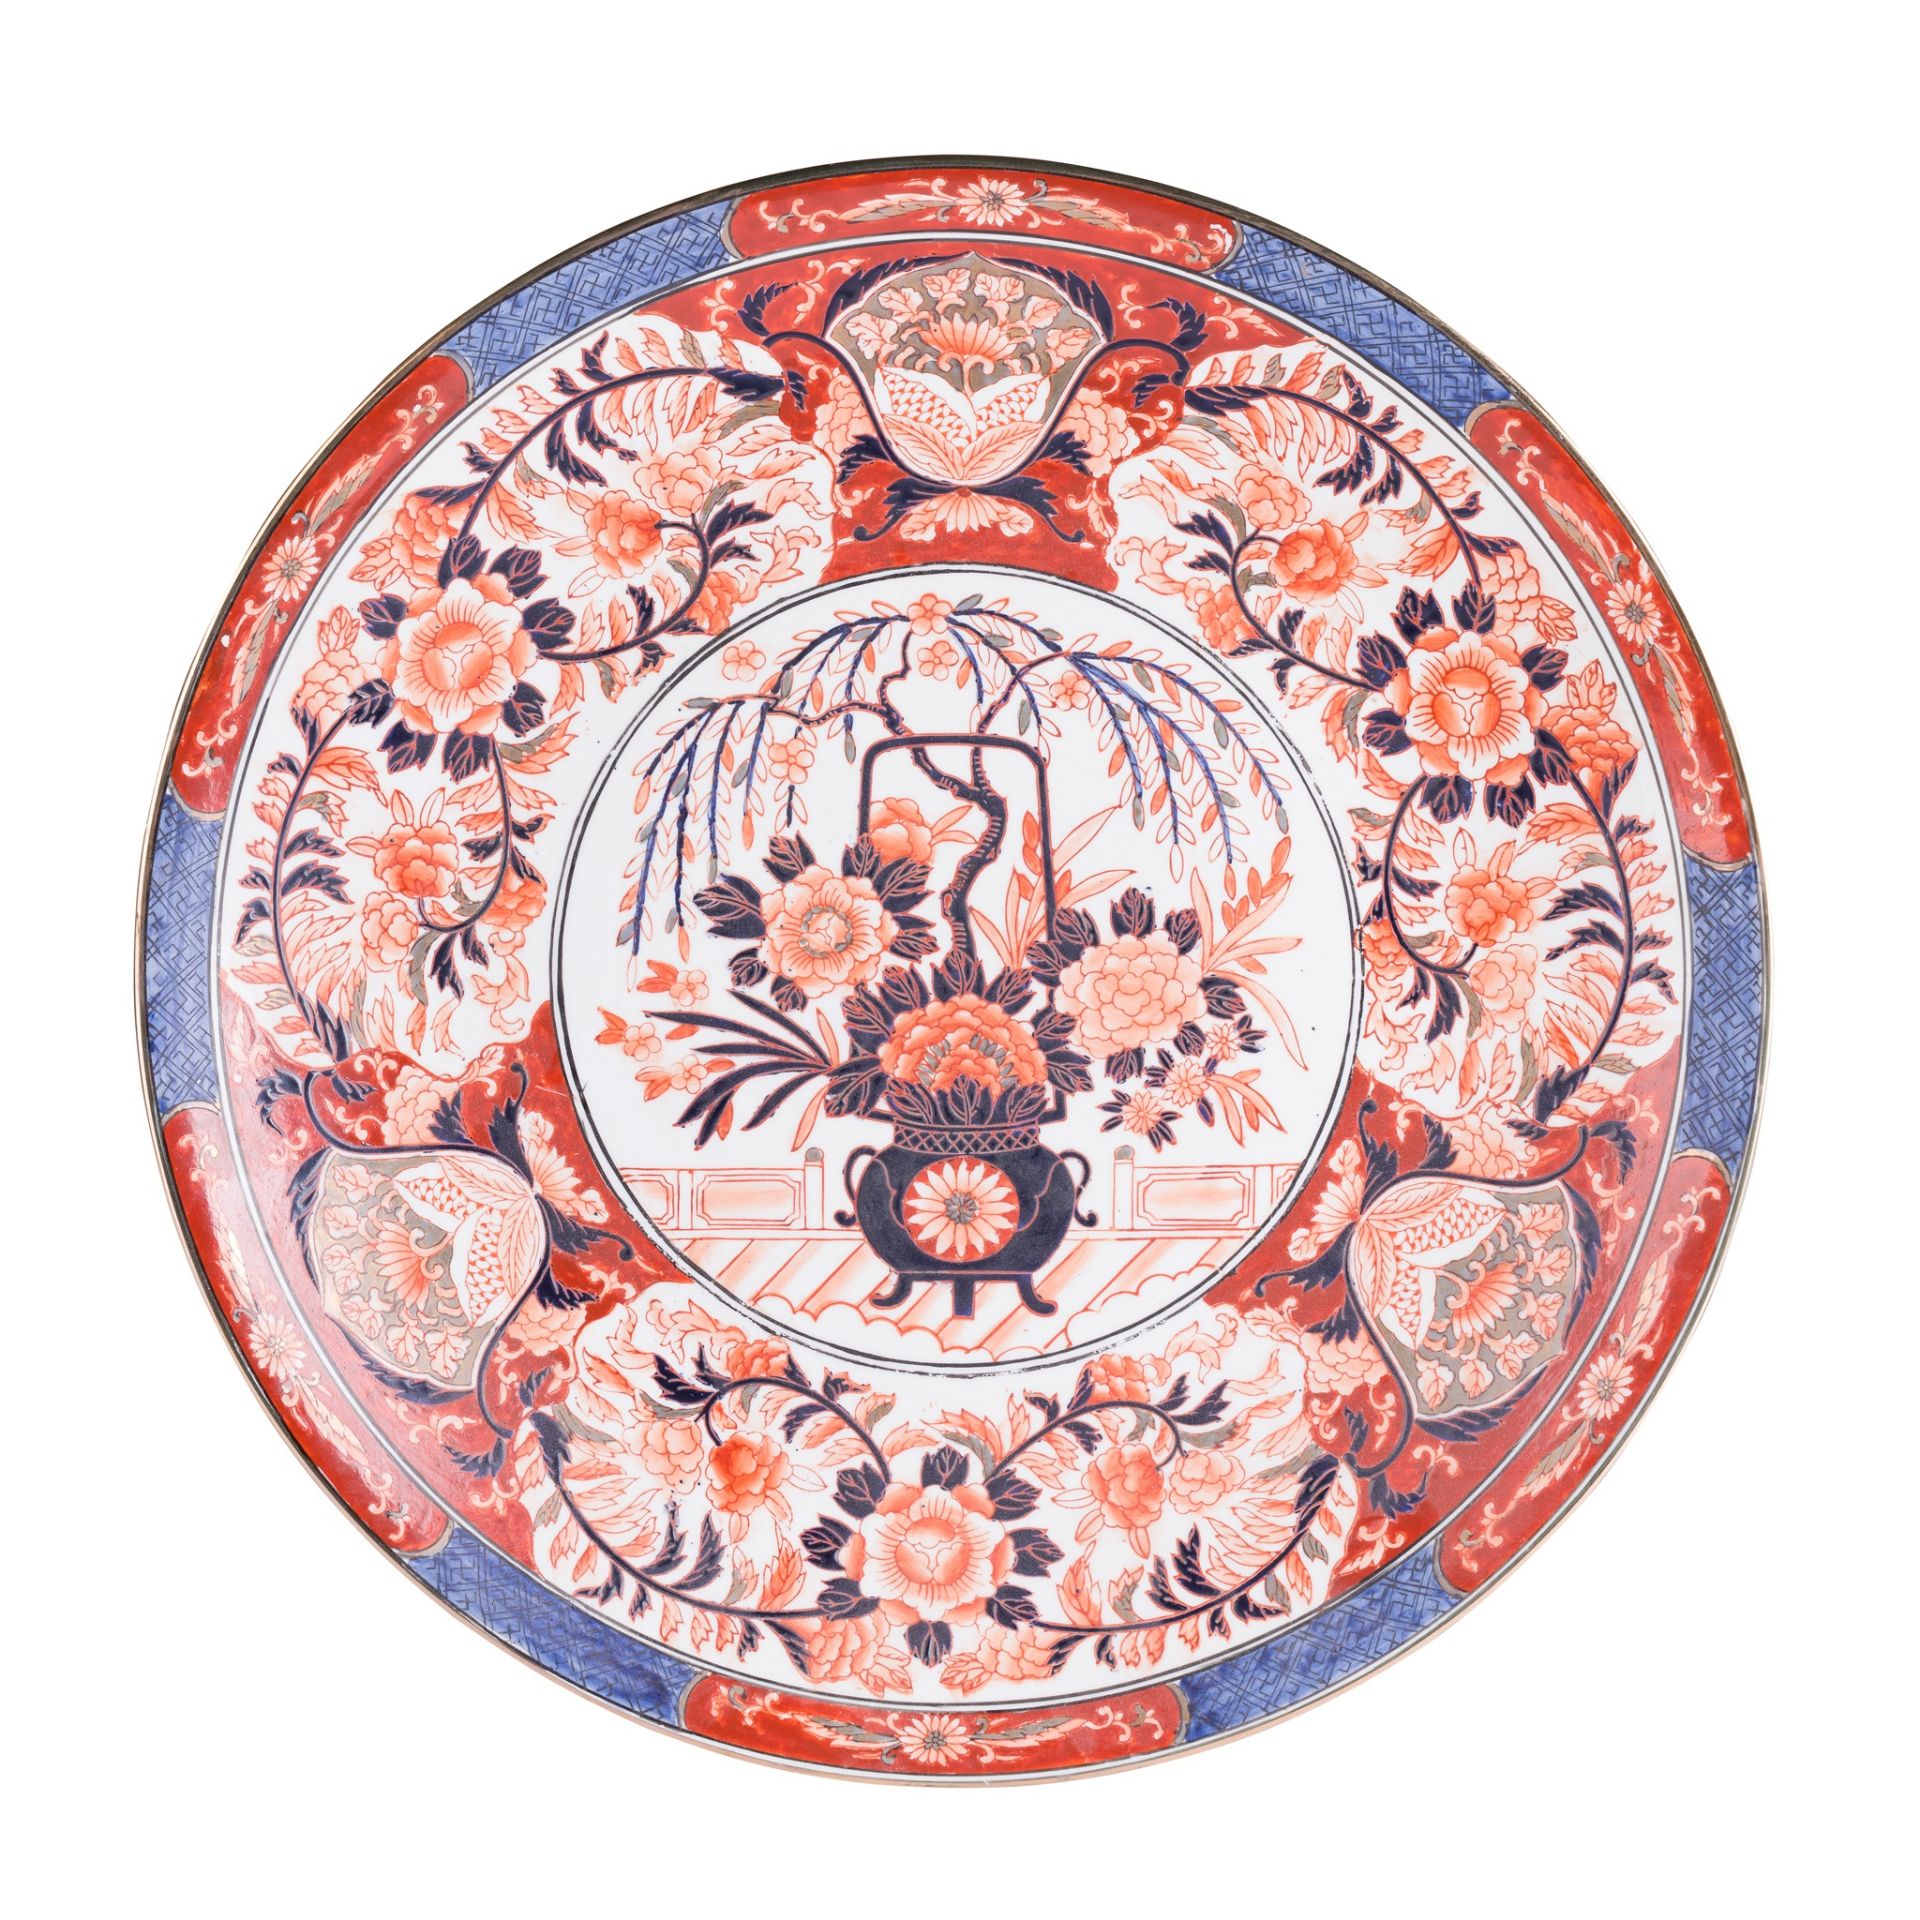 THREE LARGE JAPANESE IMARI PORCELAIN CHARGERS MEIJI PERIOD, LATE 19TH/EARLY 20TH CENTURY